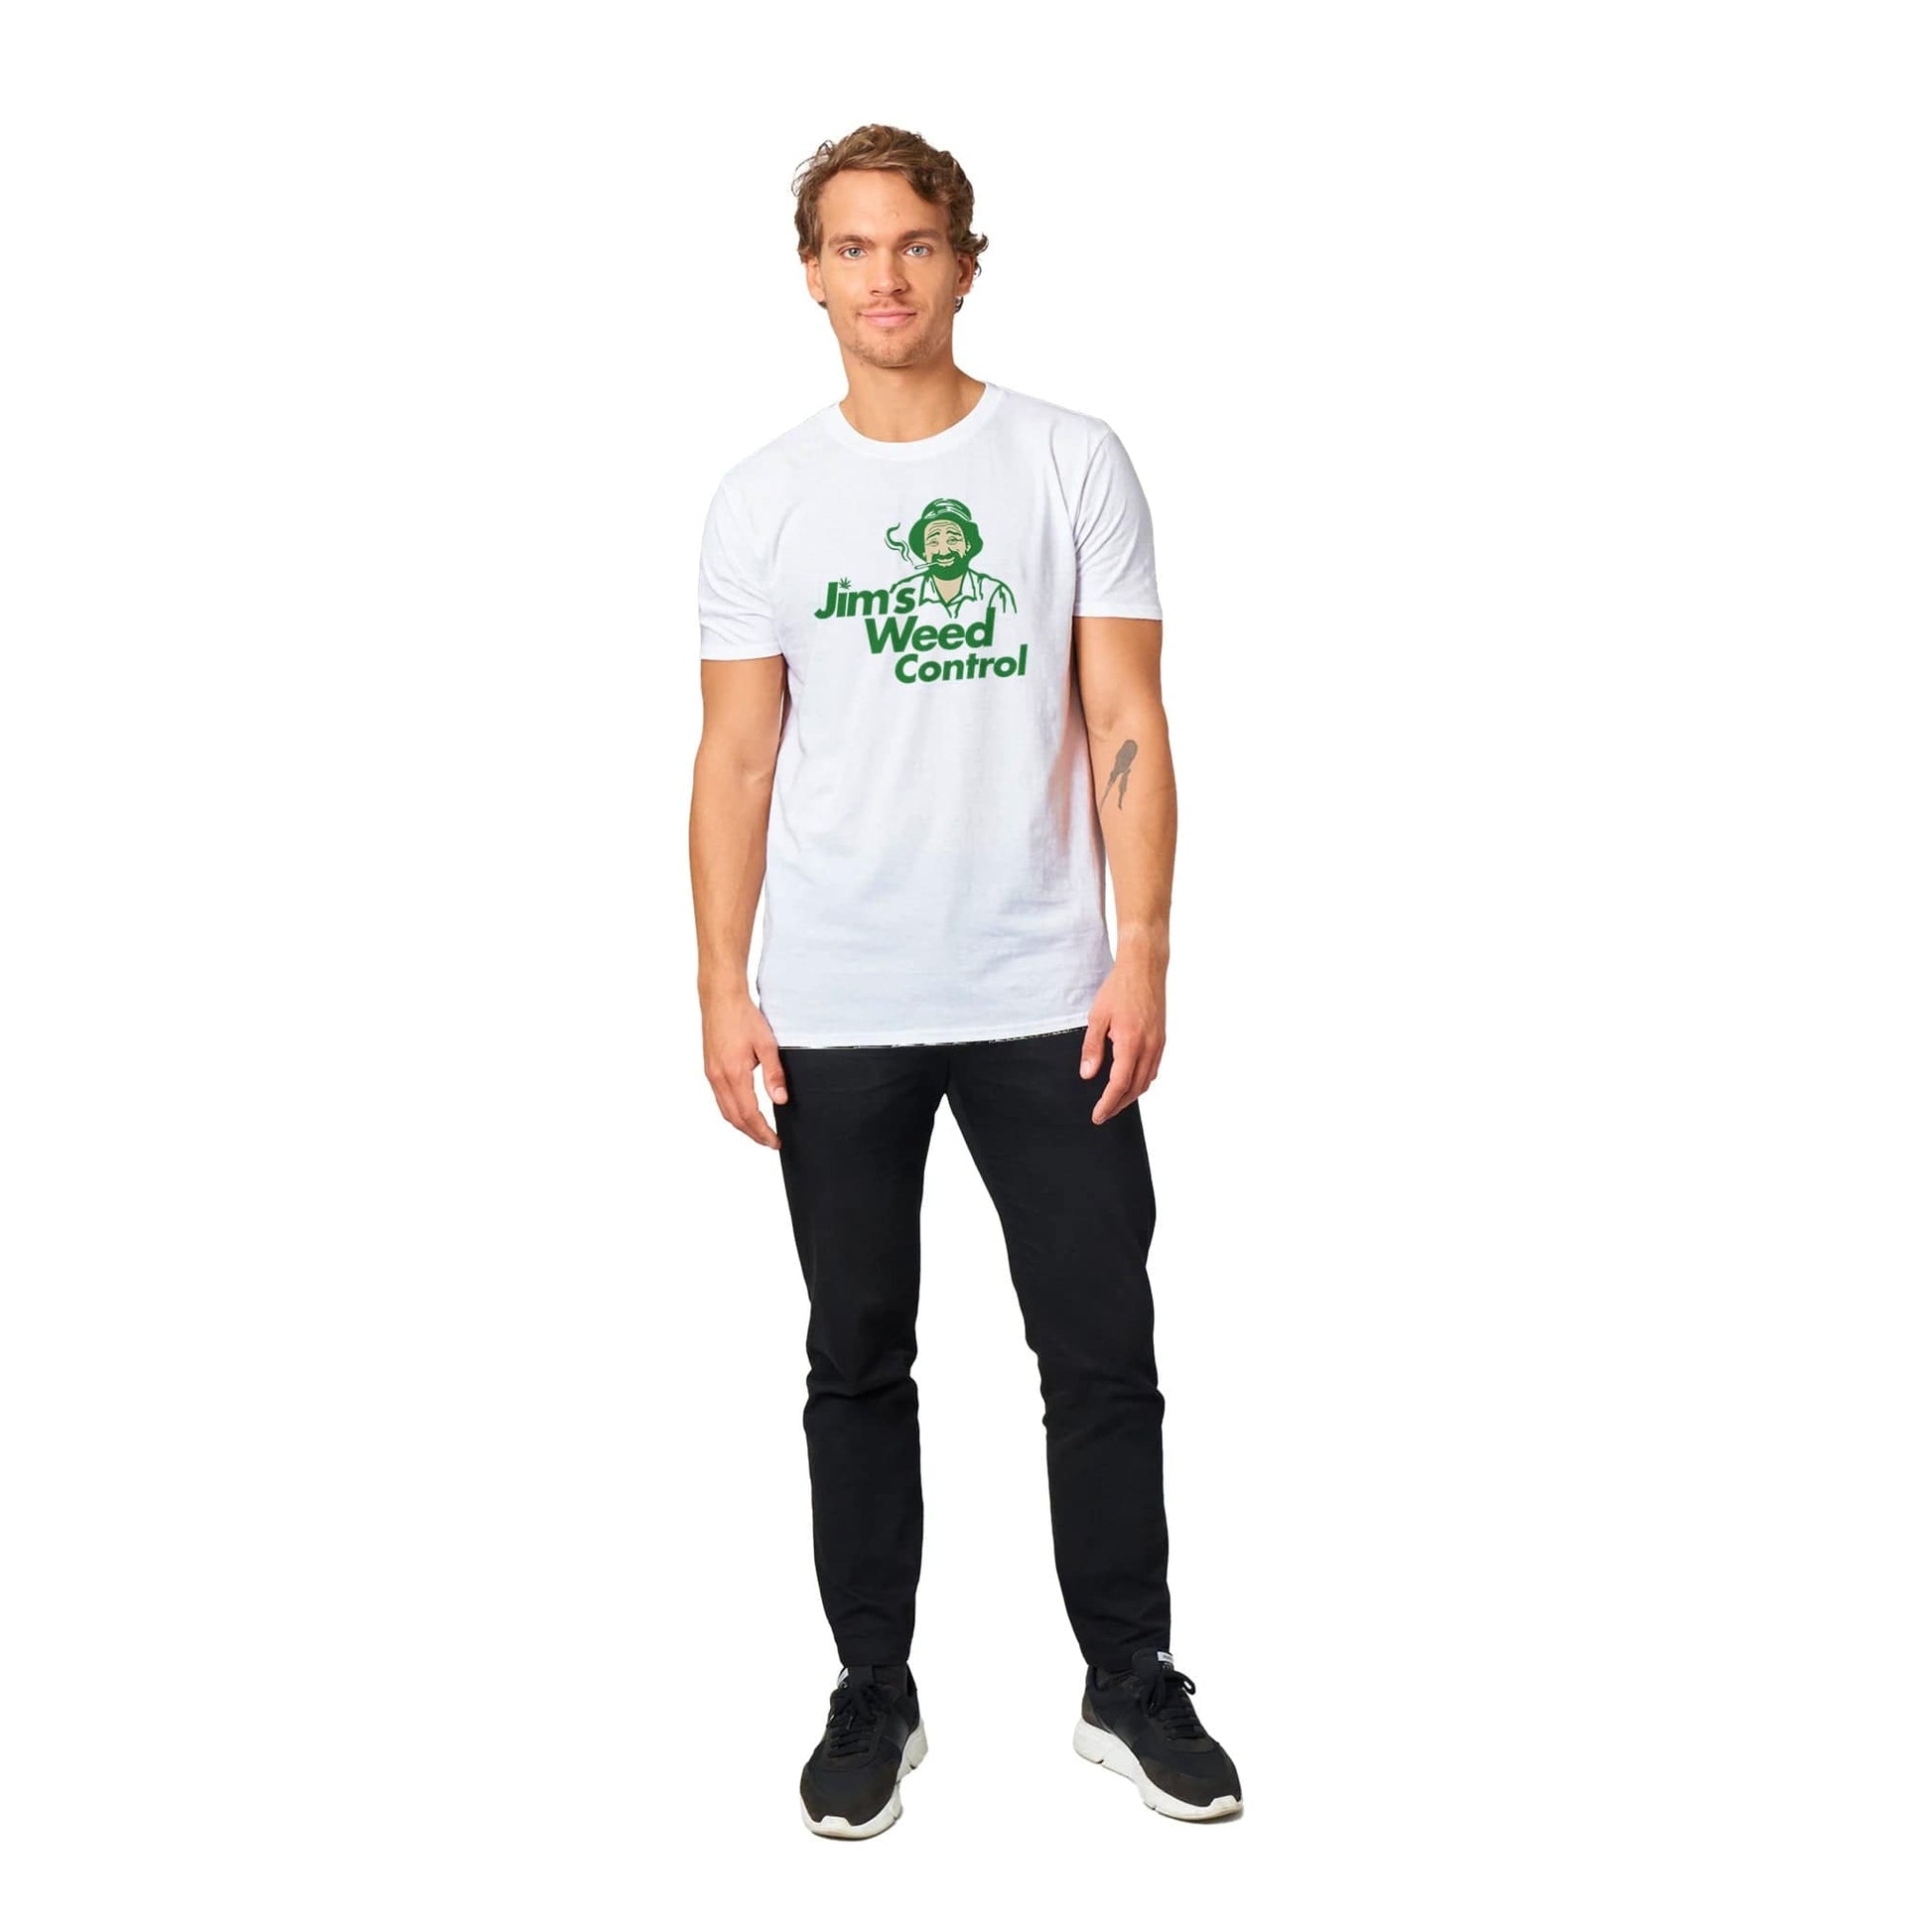 Jims Weed Control T-Shirt Graphic Tee Australia Online